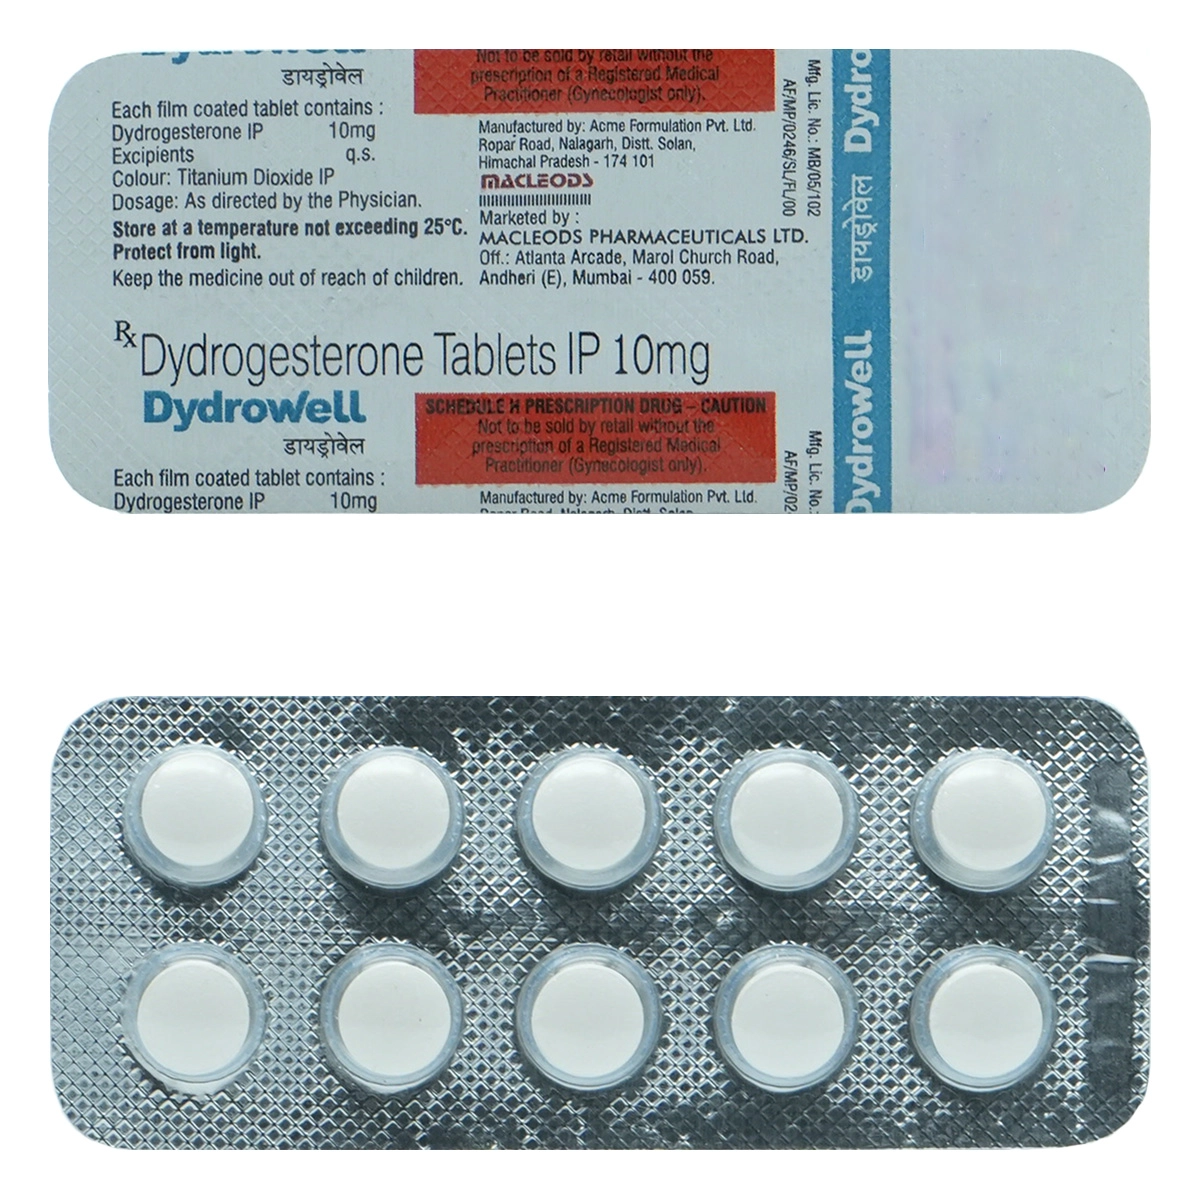 Duphalink Tablet 10's Price, Uses, Side Effects, Composition